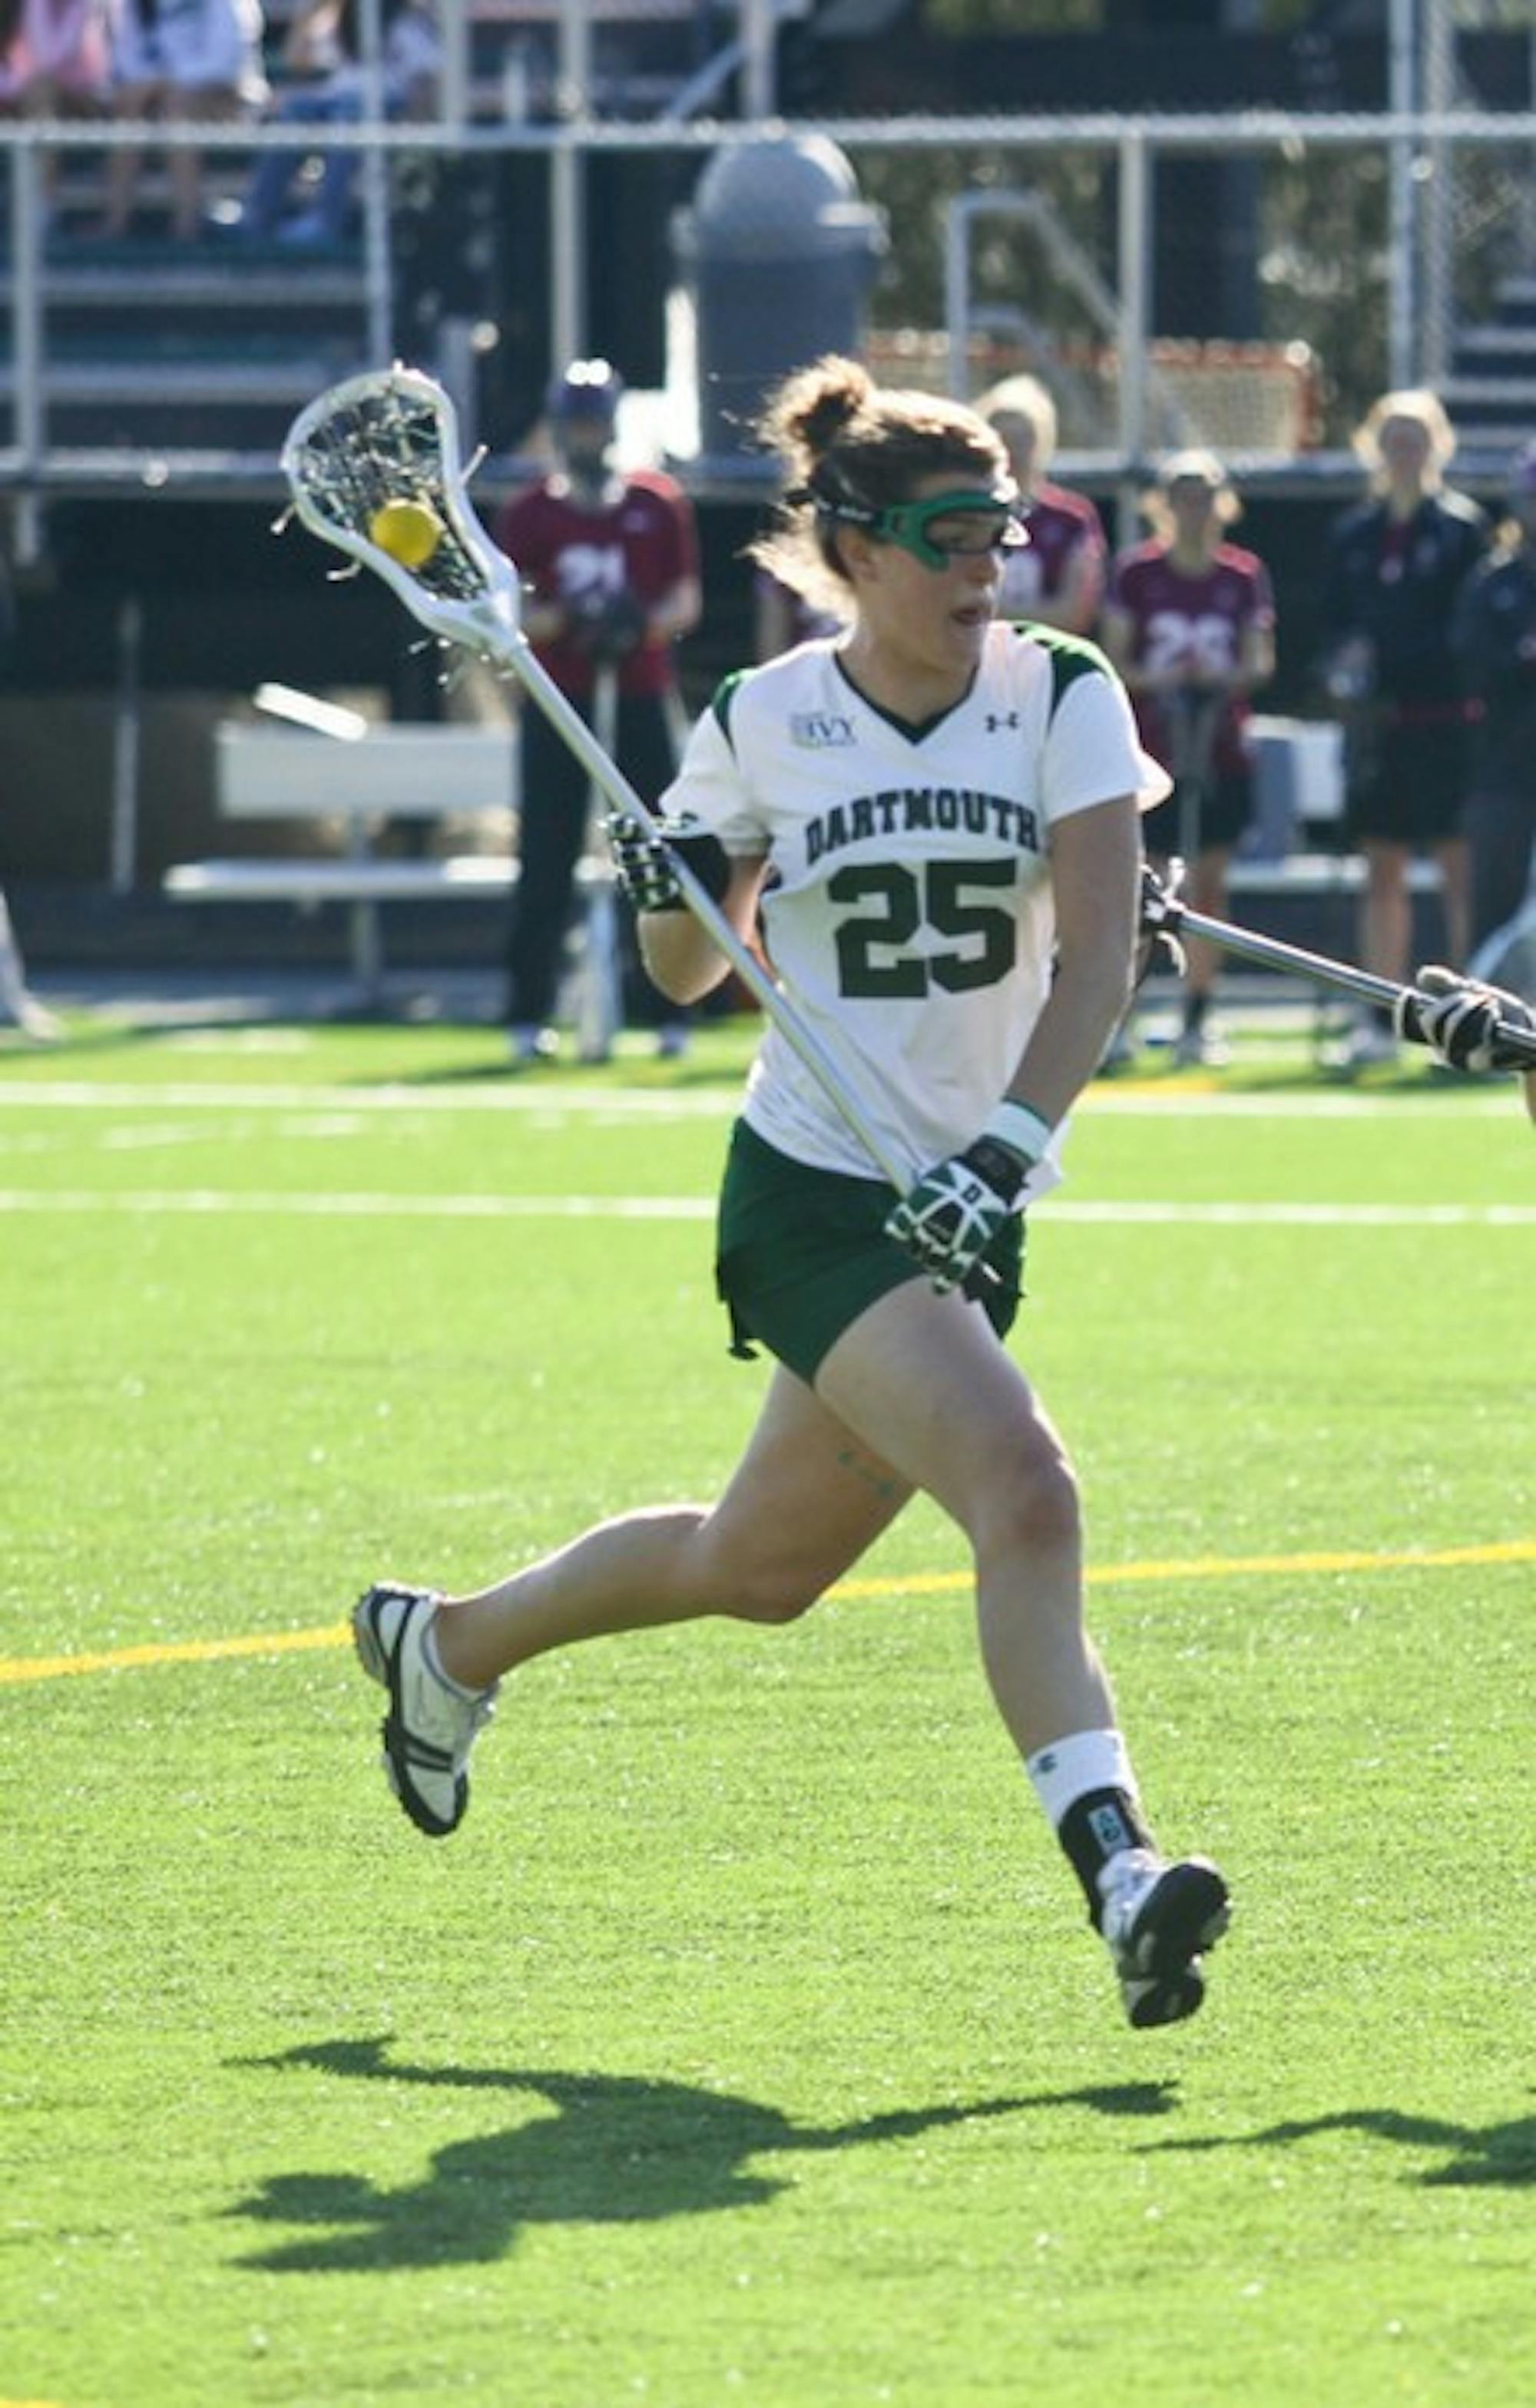 The women's lacrosse team could not stop the Terriers' offense on Wednesday, allowing 15 goals in the loss.